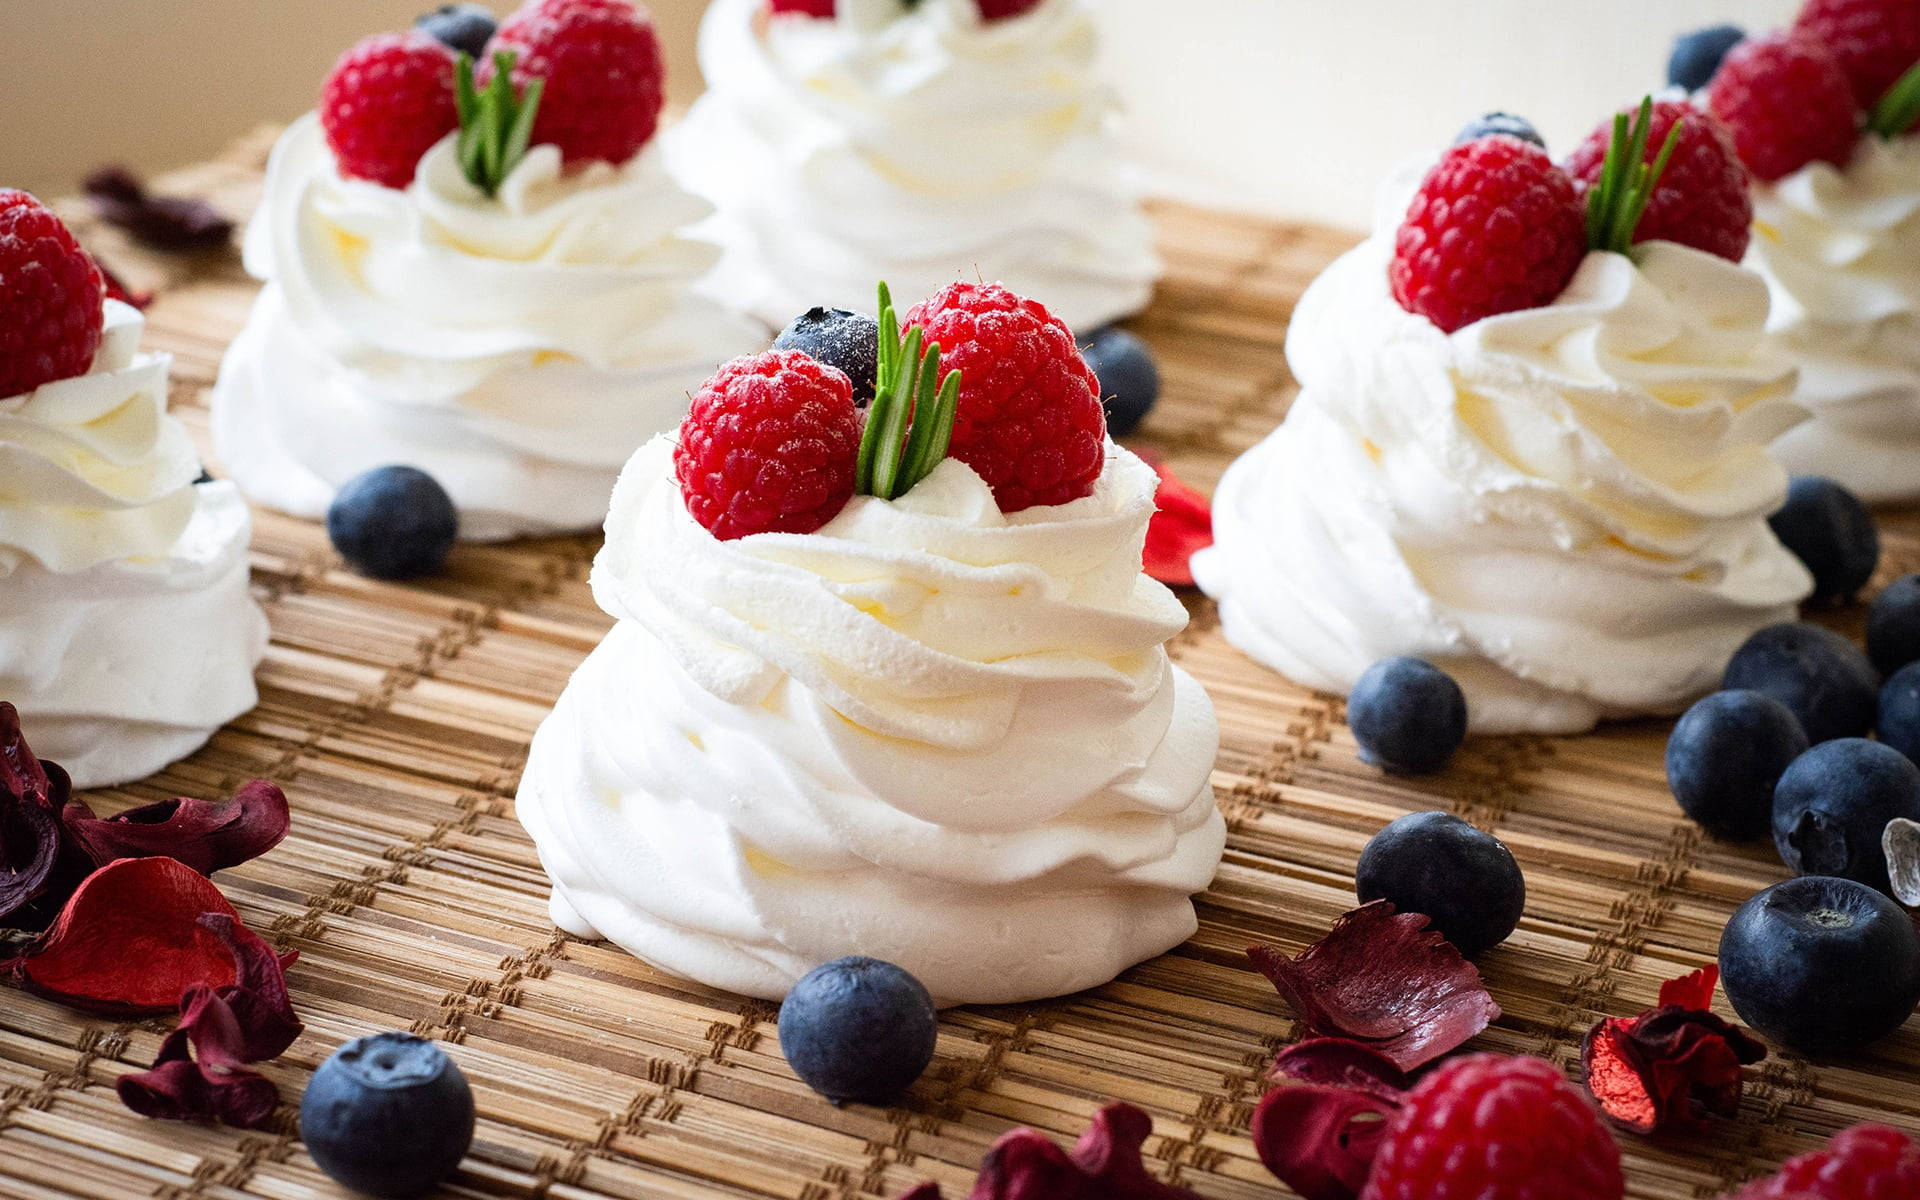 Whipped Cream With Berries